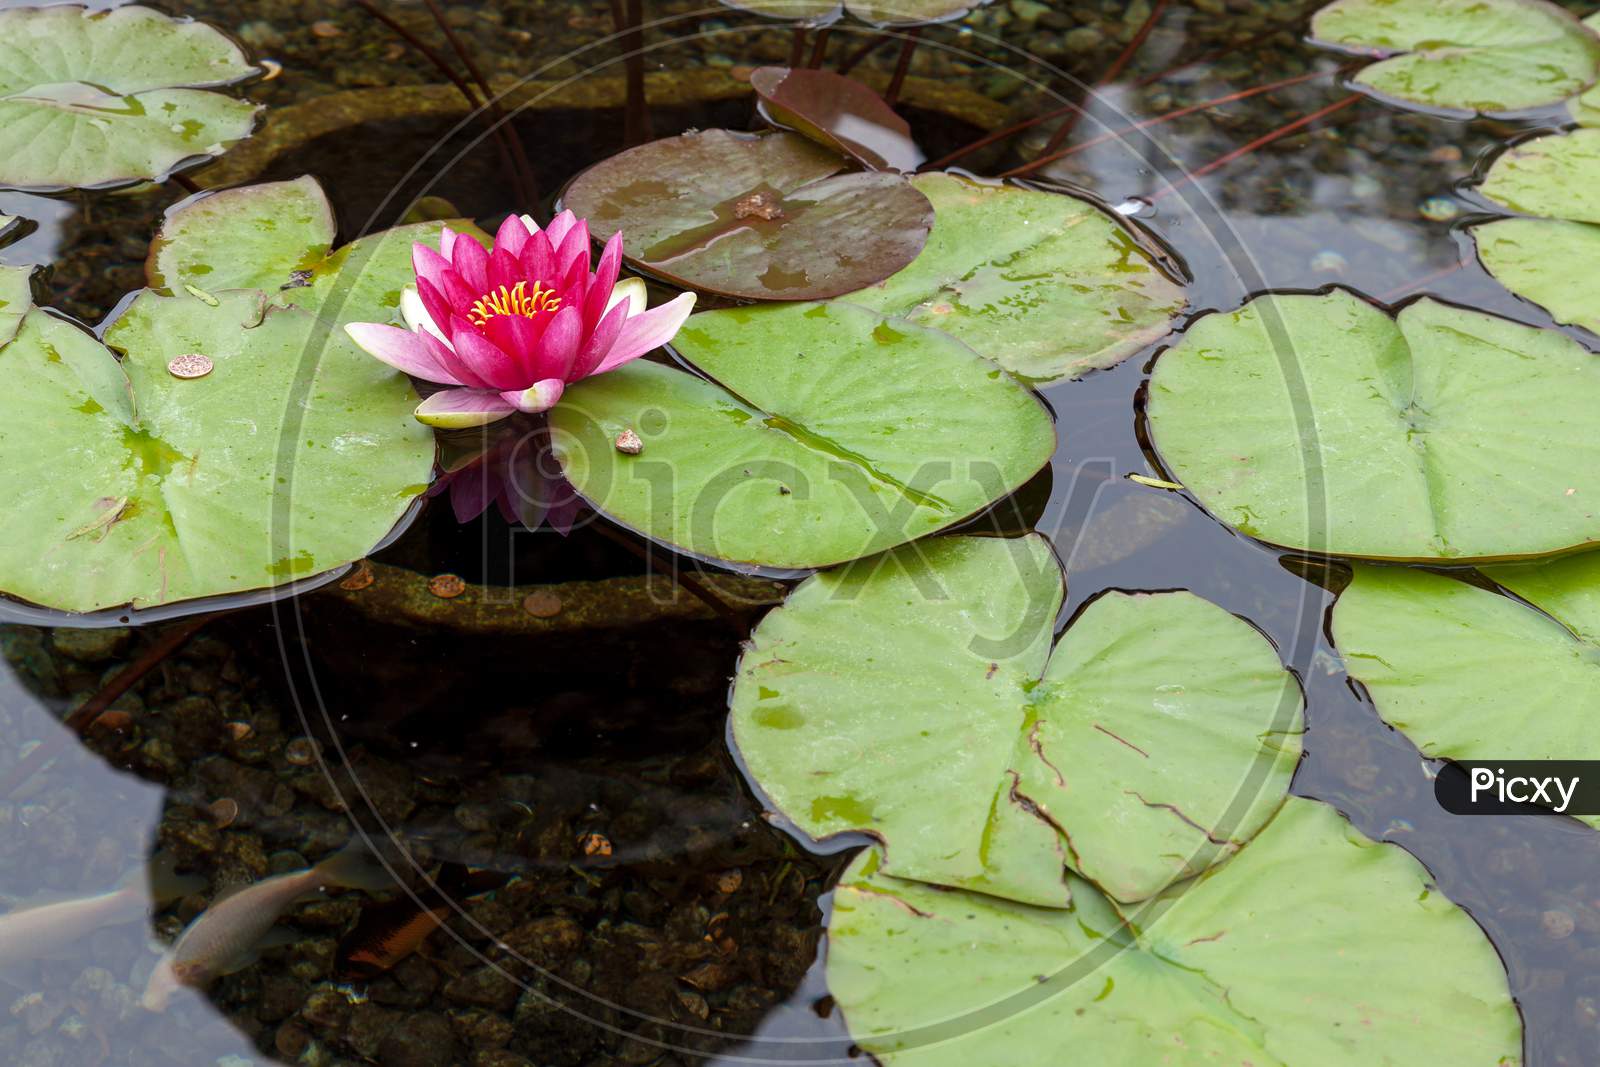 Water Lily (Nymphaeaceae)